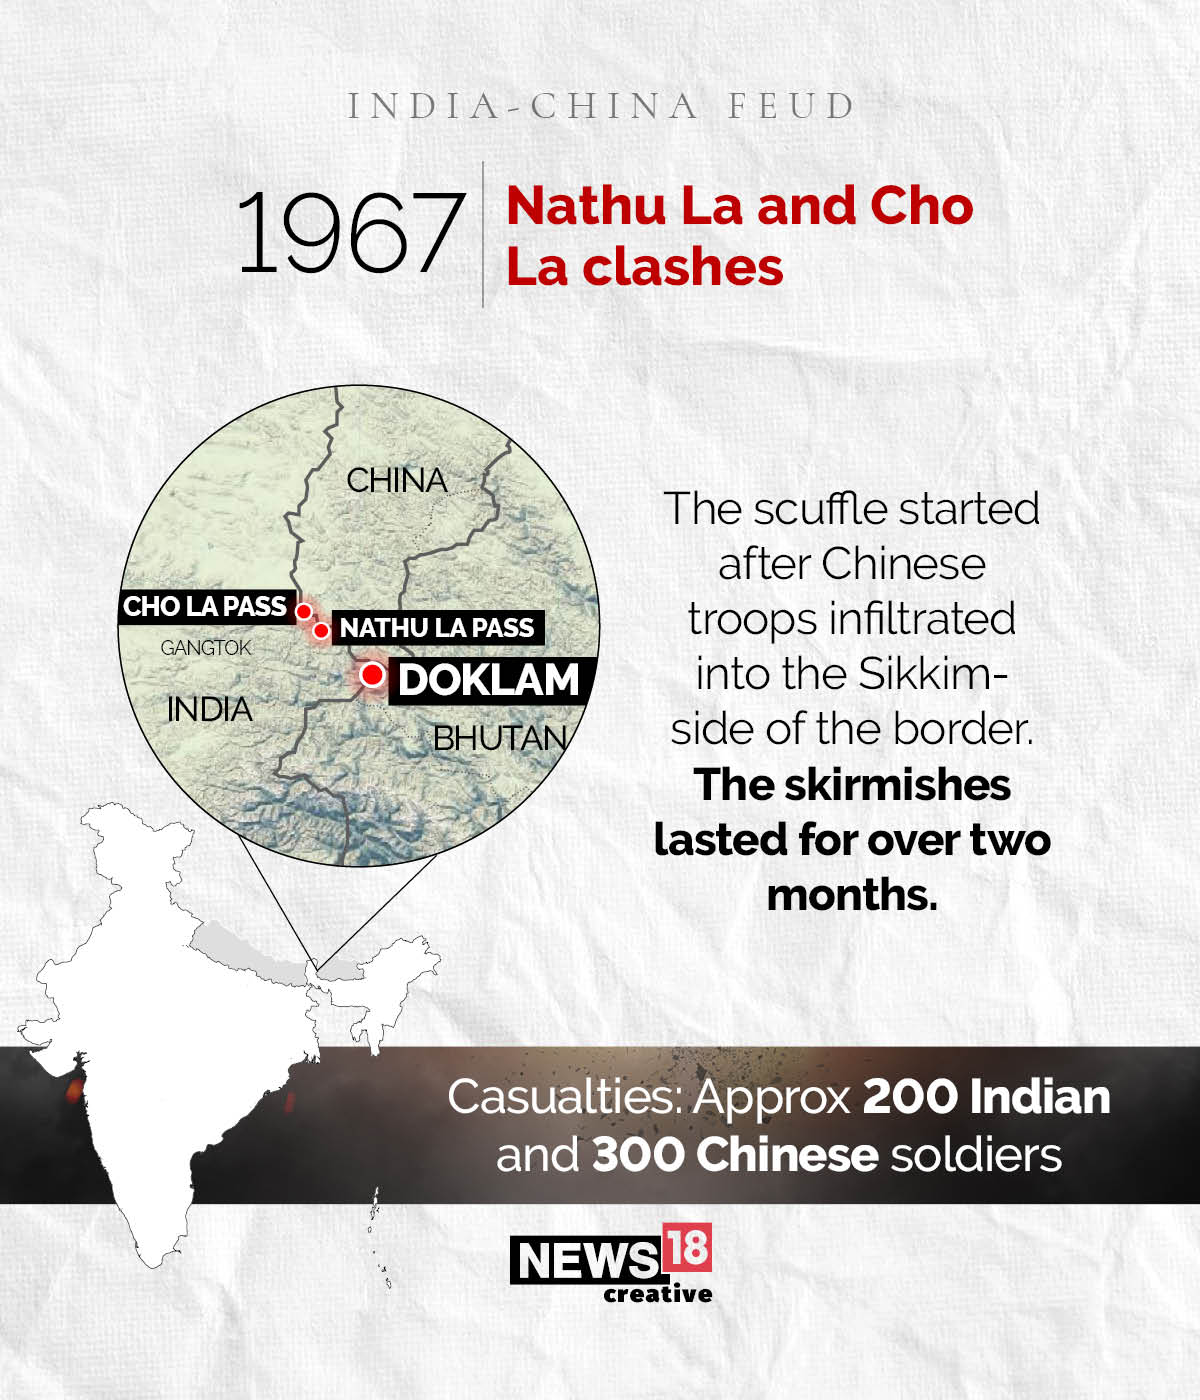 India-China feuds over the past fifty years